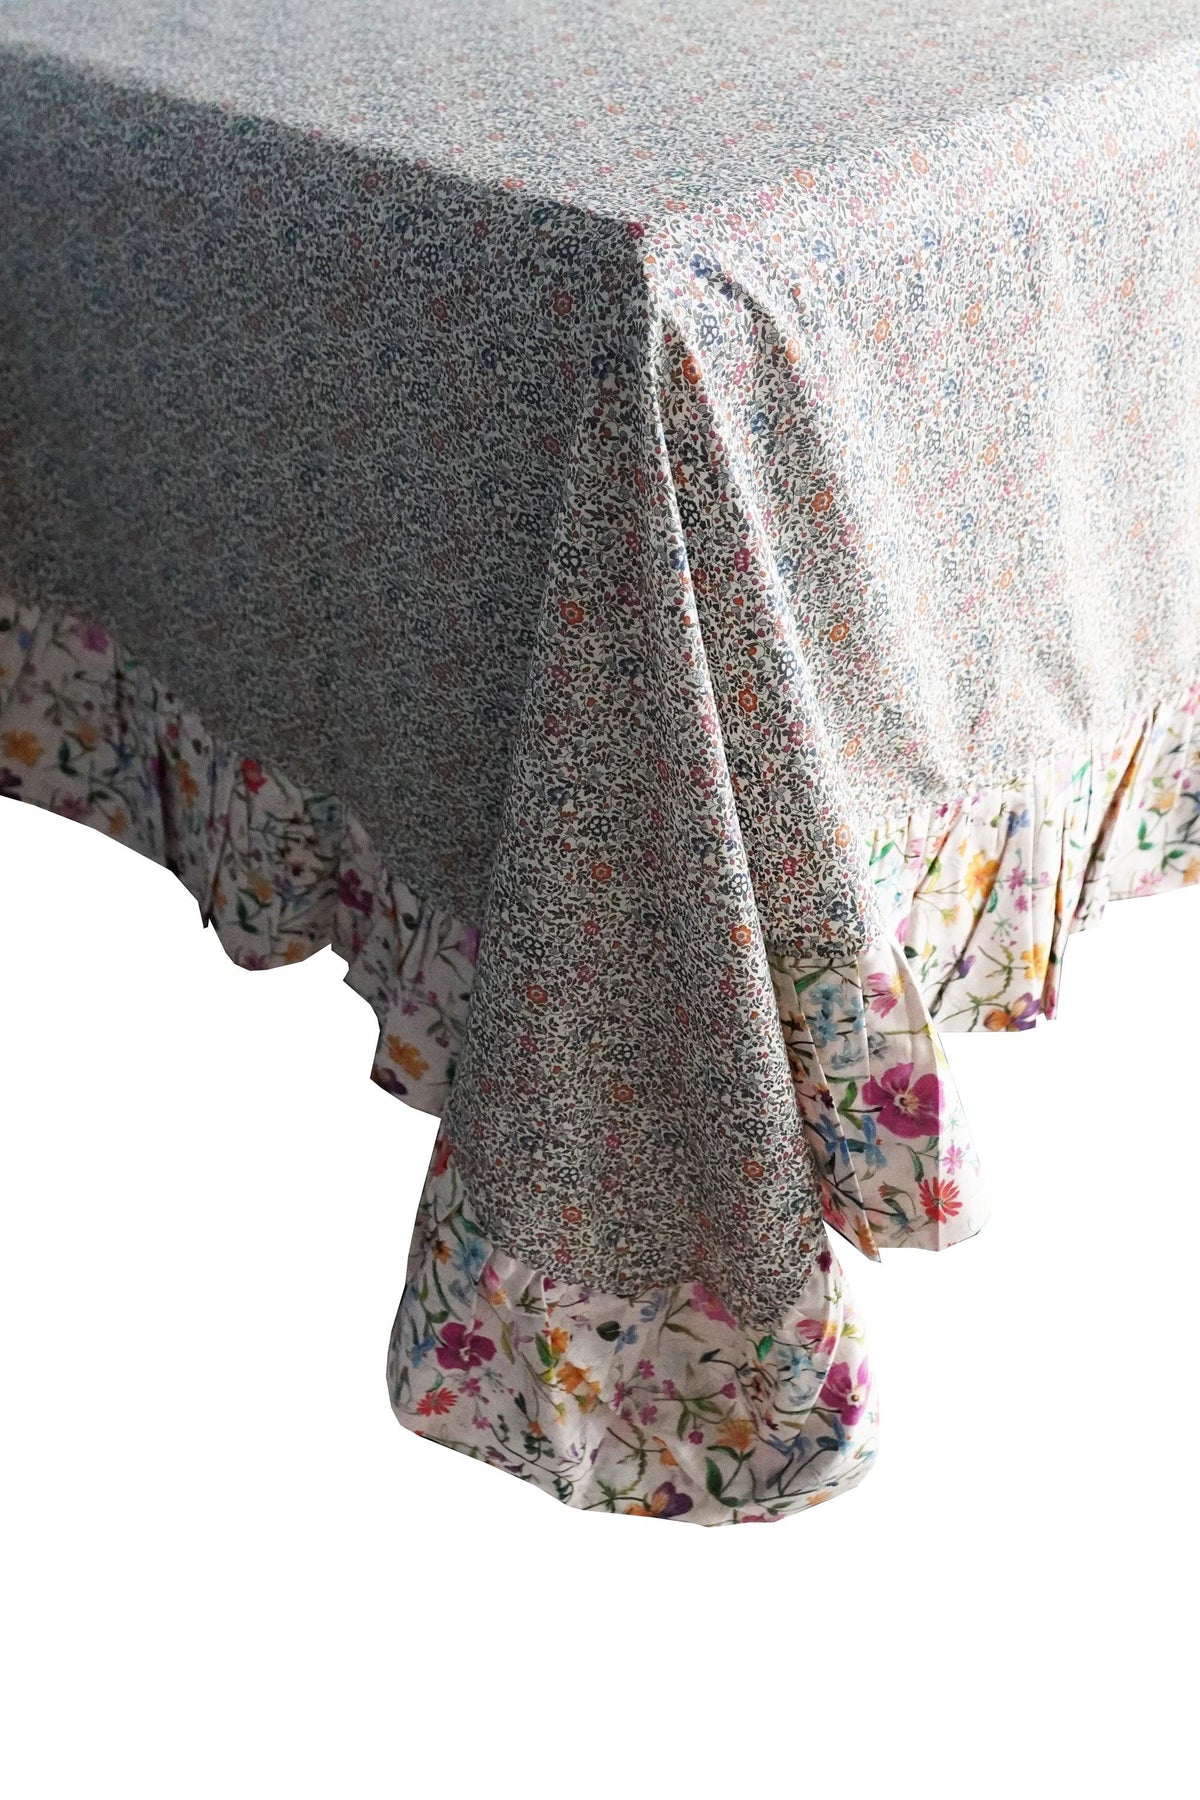 Ruffle Edge Tablecloth made with Liberty Fabric KATIE & MILLIE & LINEN GARDEN - Coco & Wolf